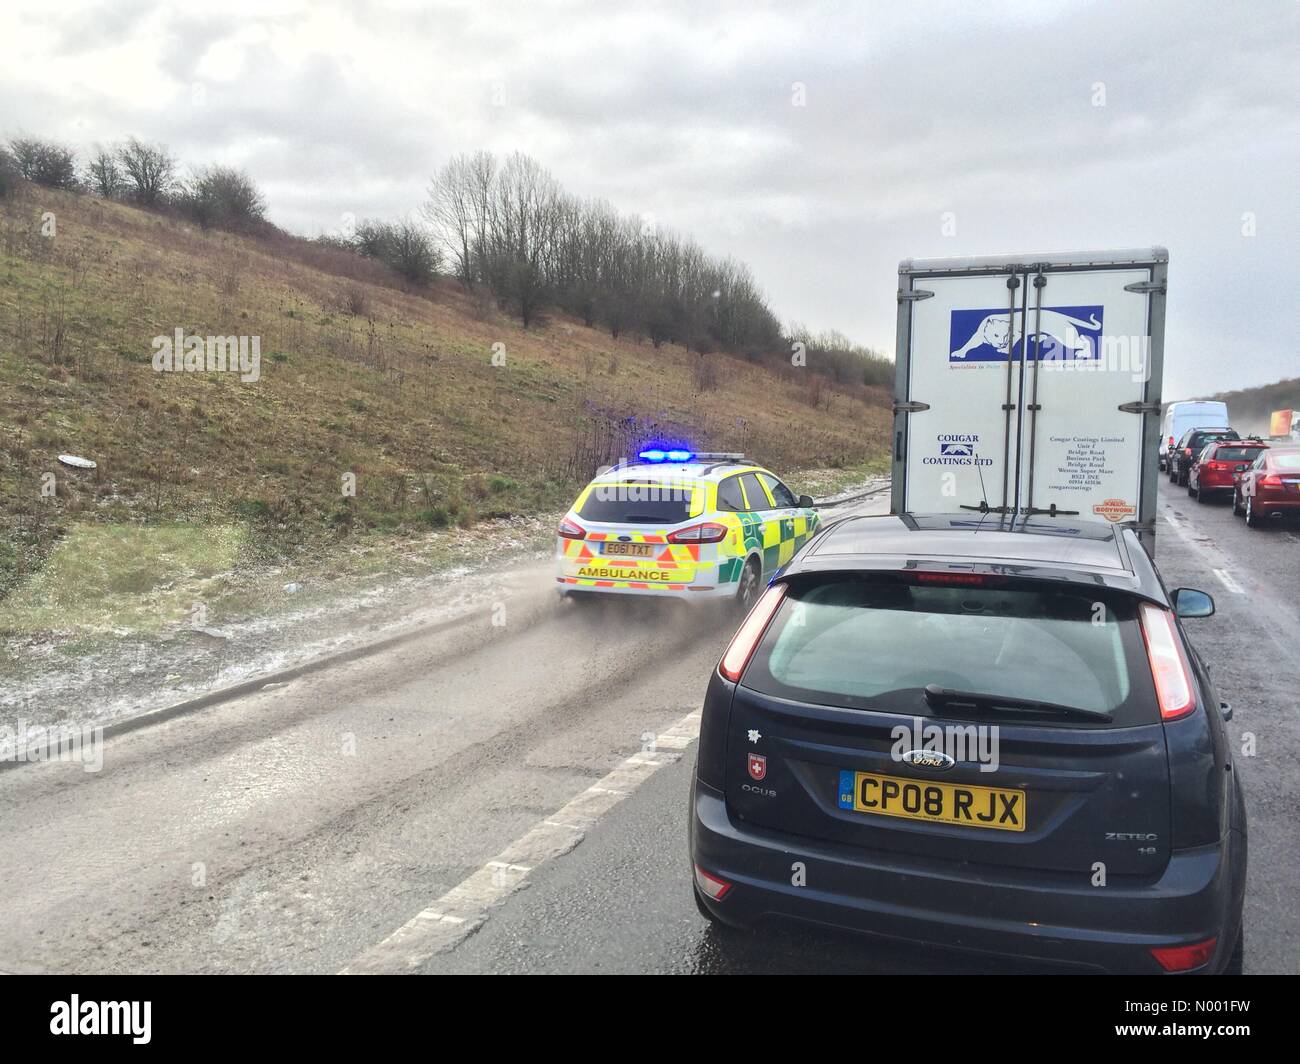 Banwell, North Somerset, UK. 23rd Feb, 2015. Paramedic car rushes to scene of an accident on the M5 southbound motorway © tcrphotography / StockimoNews/Alamy Live News Credit:  tcrphotography/StockimoNews/Alamy Live News Stock Photo